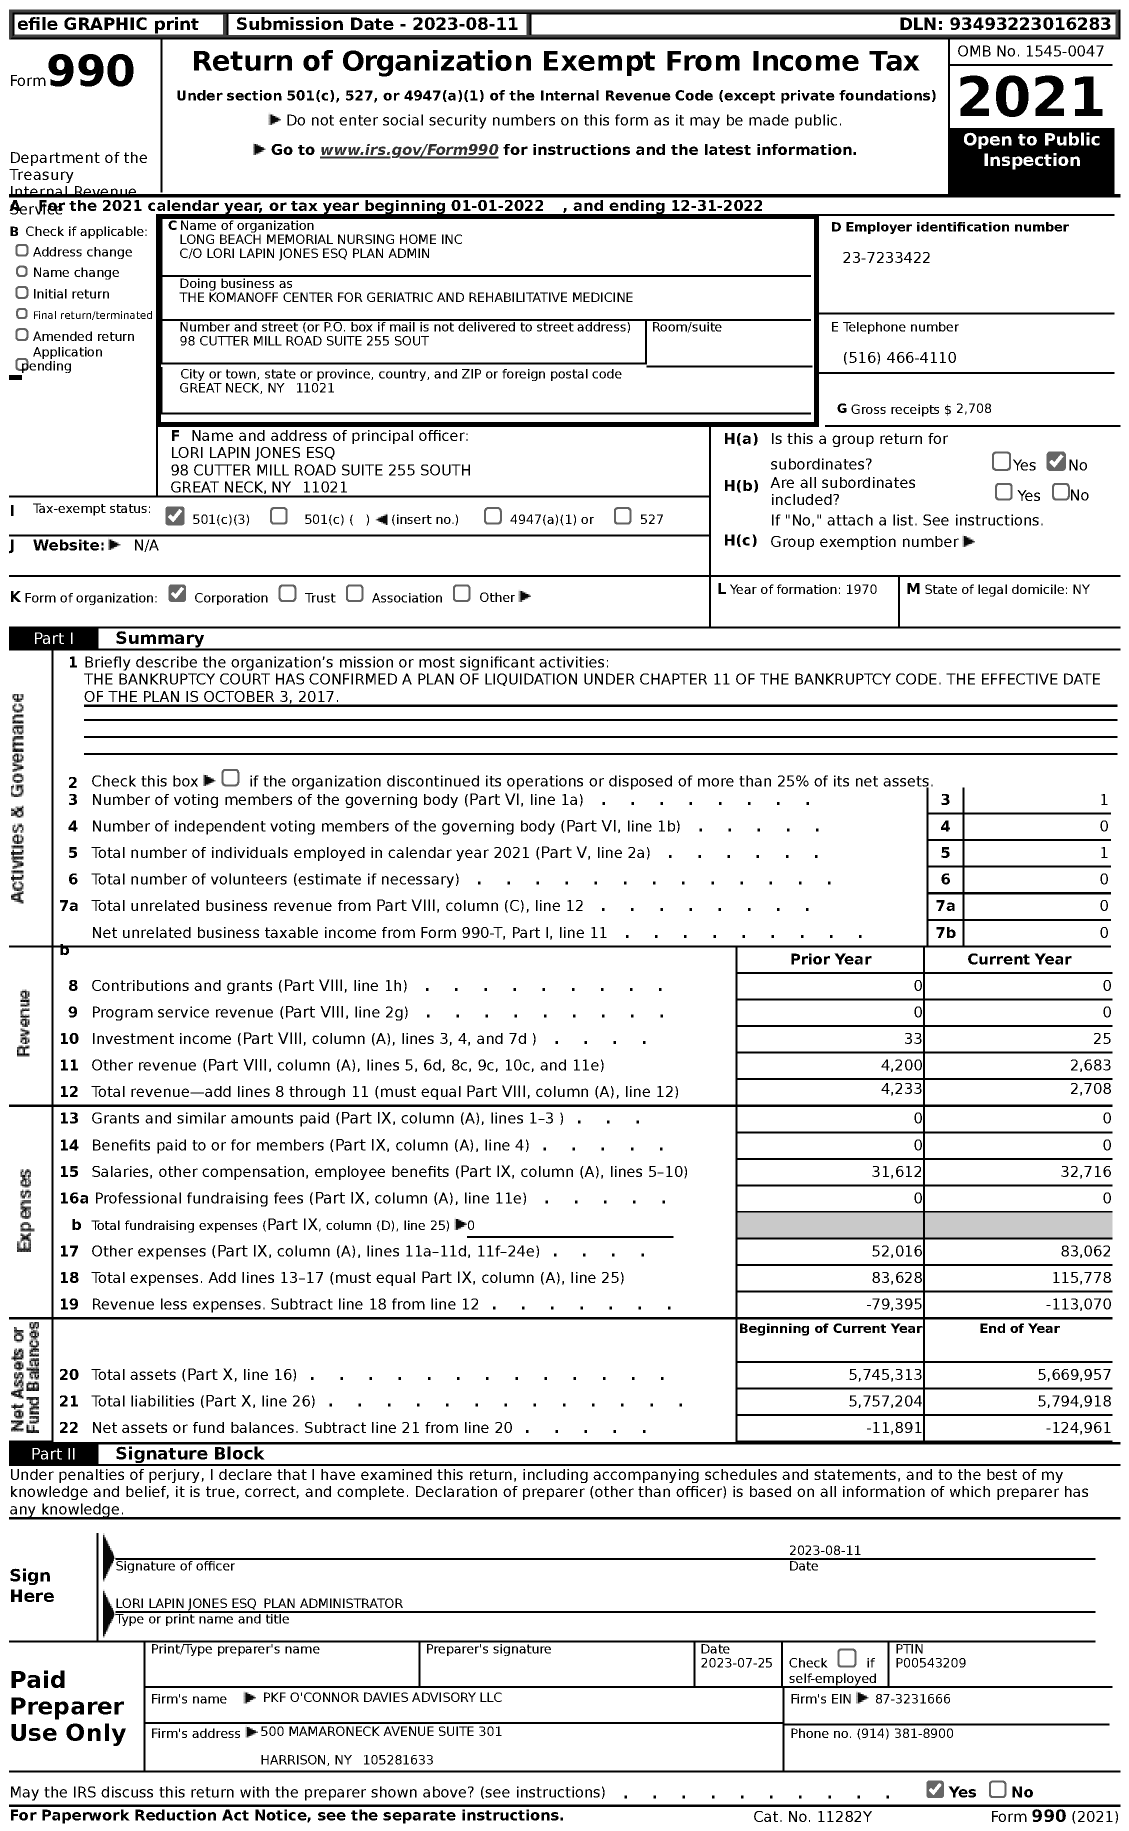 Image of first page of 2022 Form 990 for The Komanoff Center for Geriatric and Rehabilitative Medicine